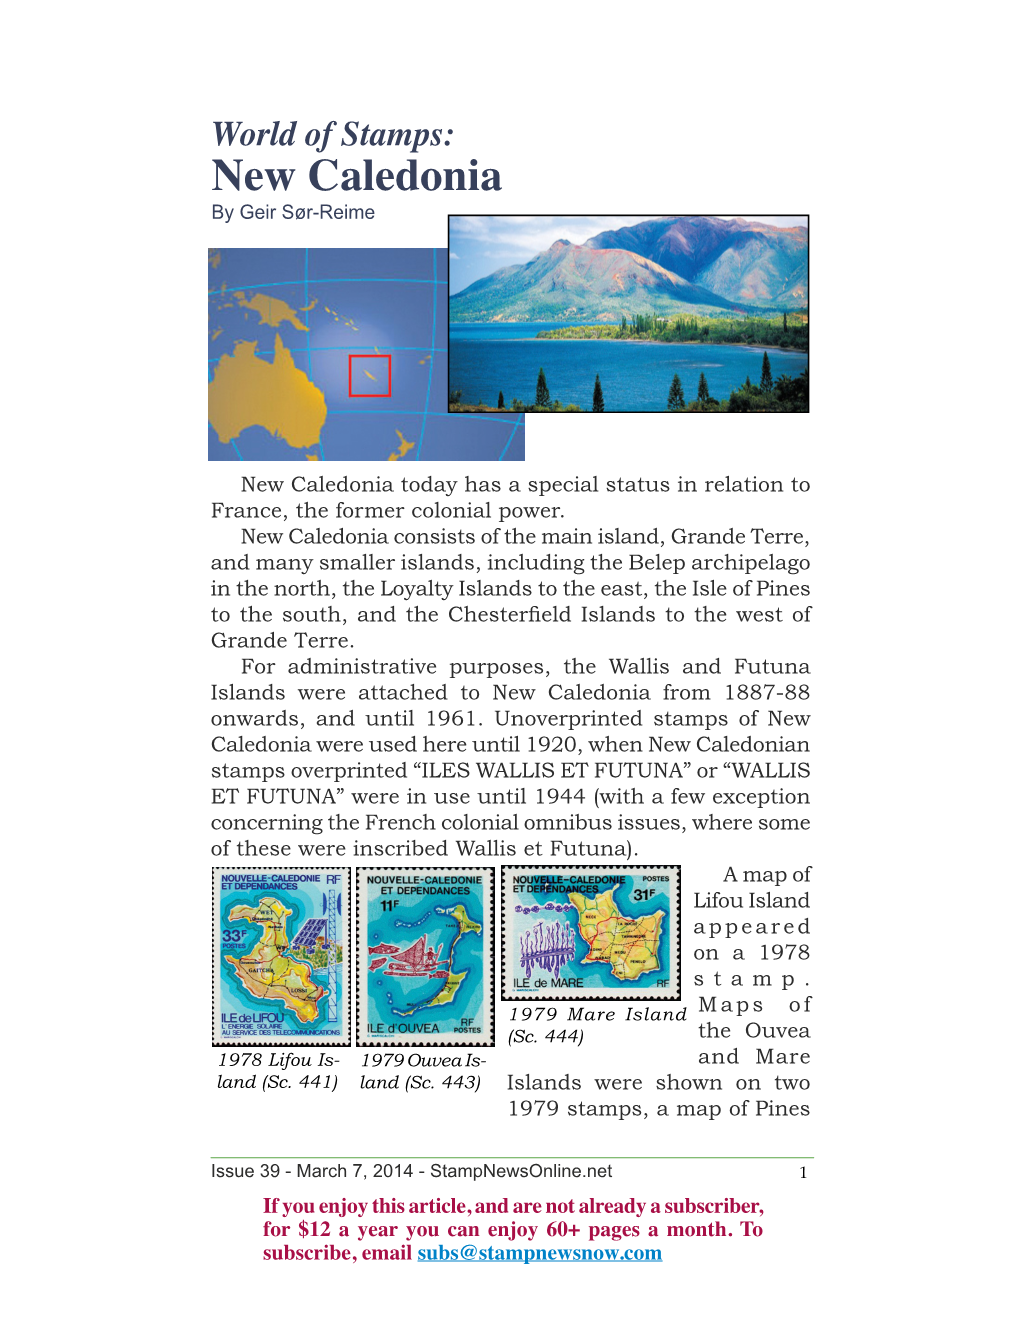 World of Stamps: New Caledonia by Geir Sør-Reime